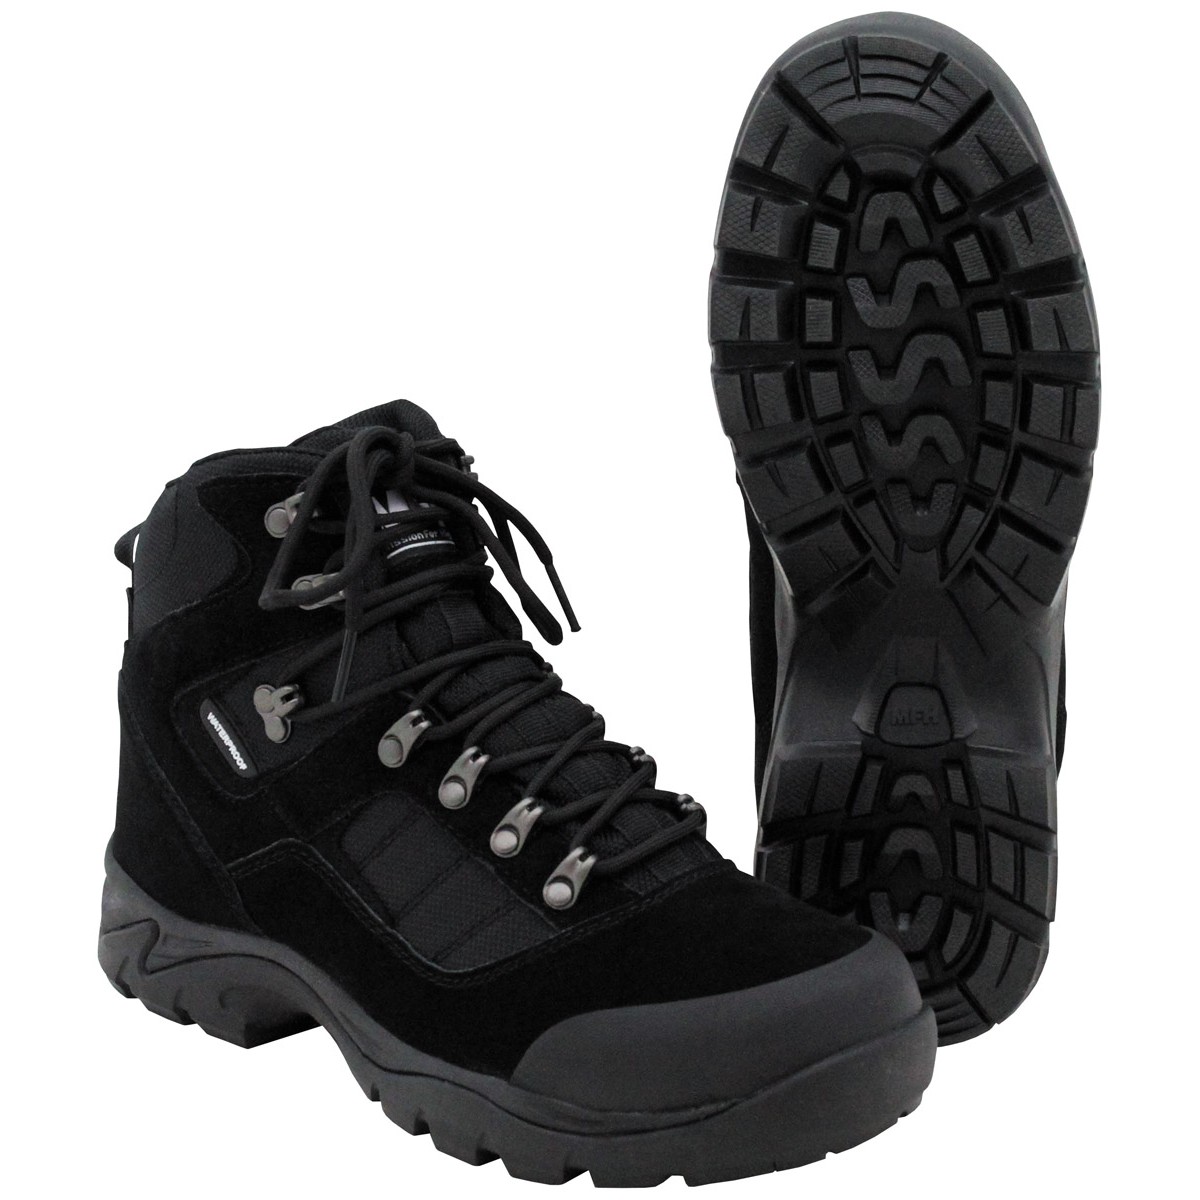 Tactical Police Security Combat Boots w/ HBR Membrane - Black